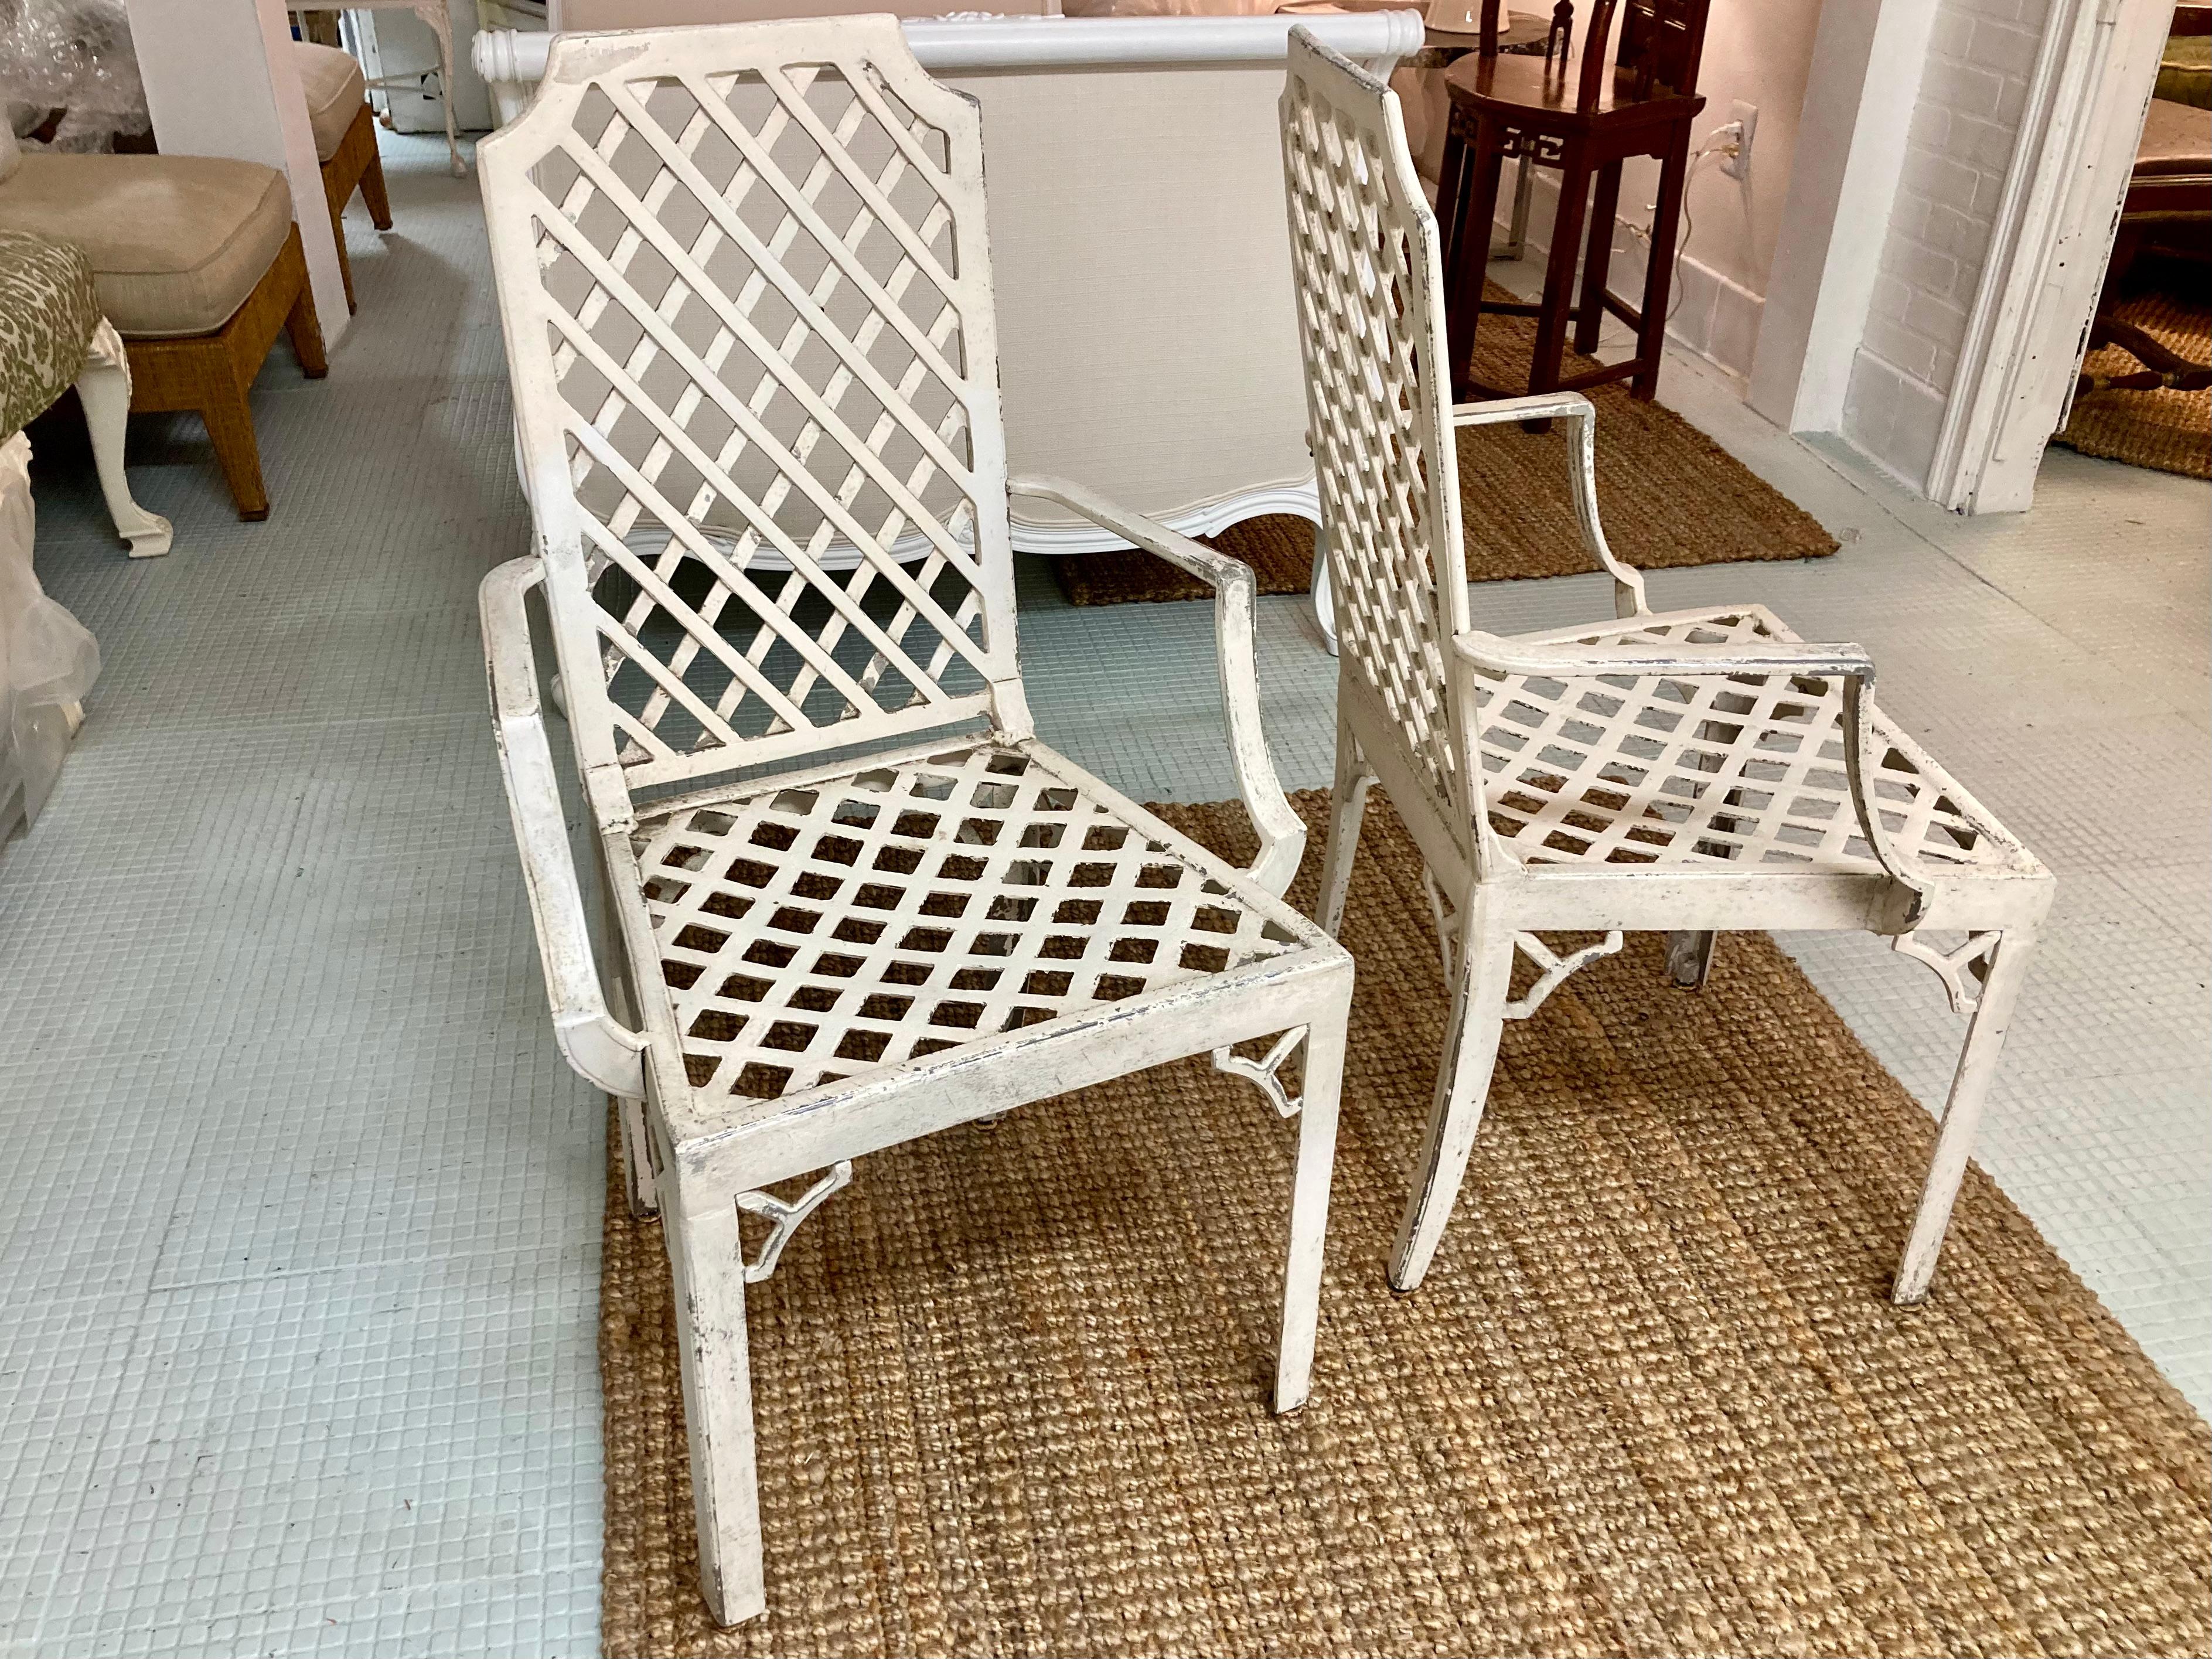 Mid-20th Century Hollywood Regency Lattice Pattern Patio Arm Chairs in Original Finish, a Pair For Sale